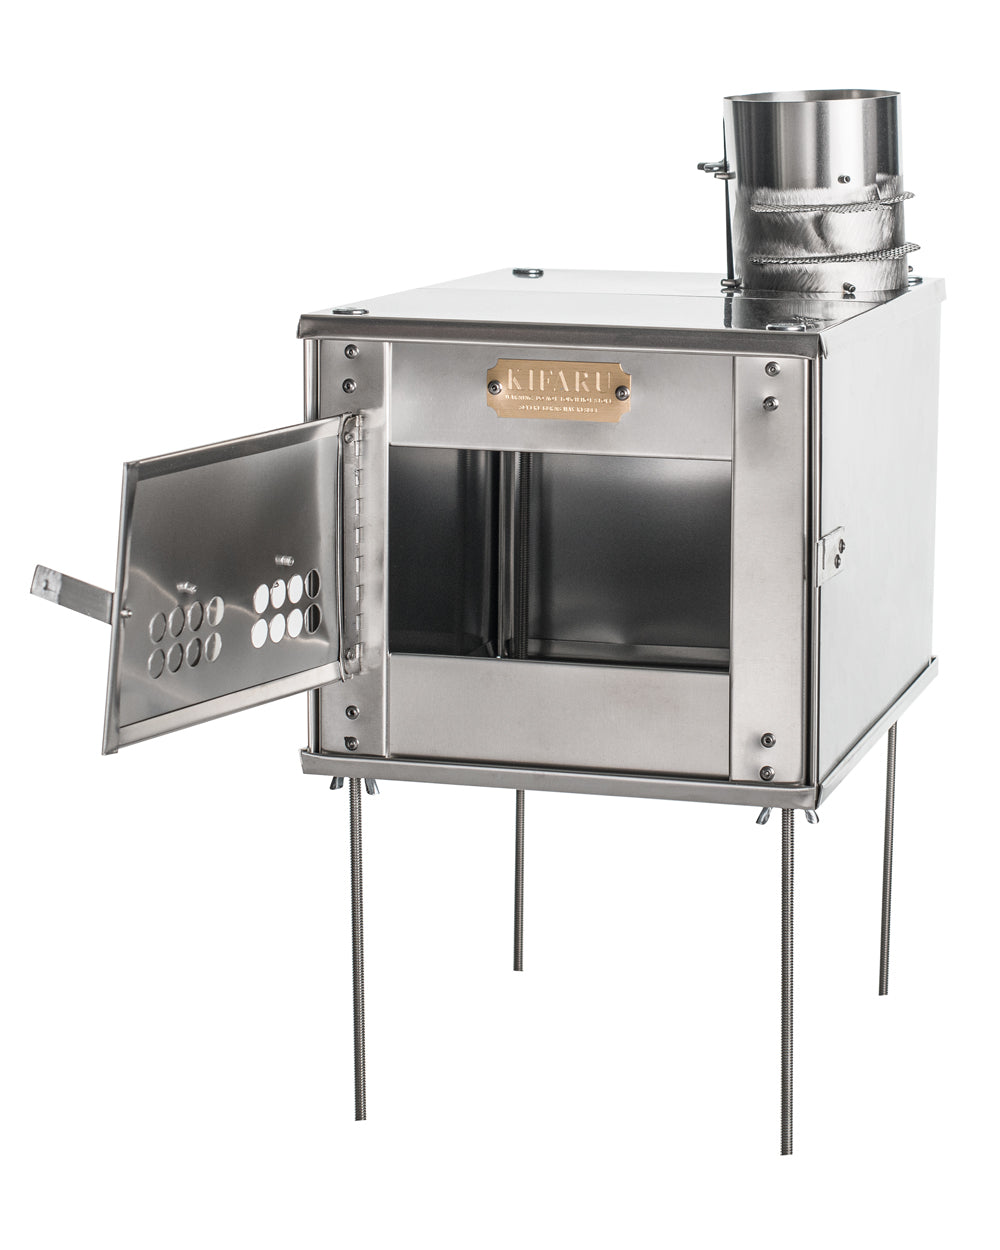 Box Stoves (Stainless Steel)